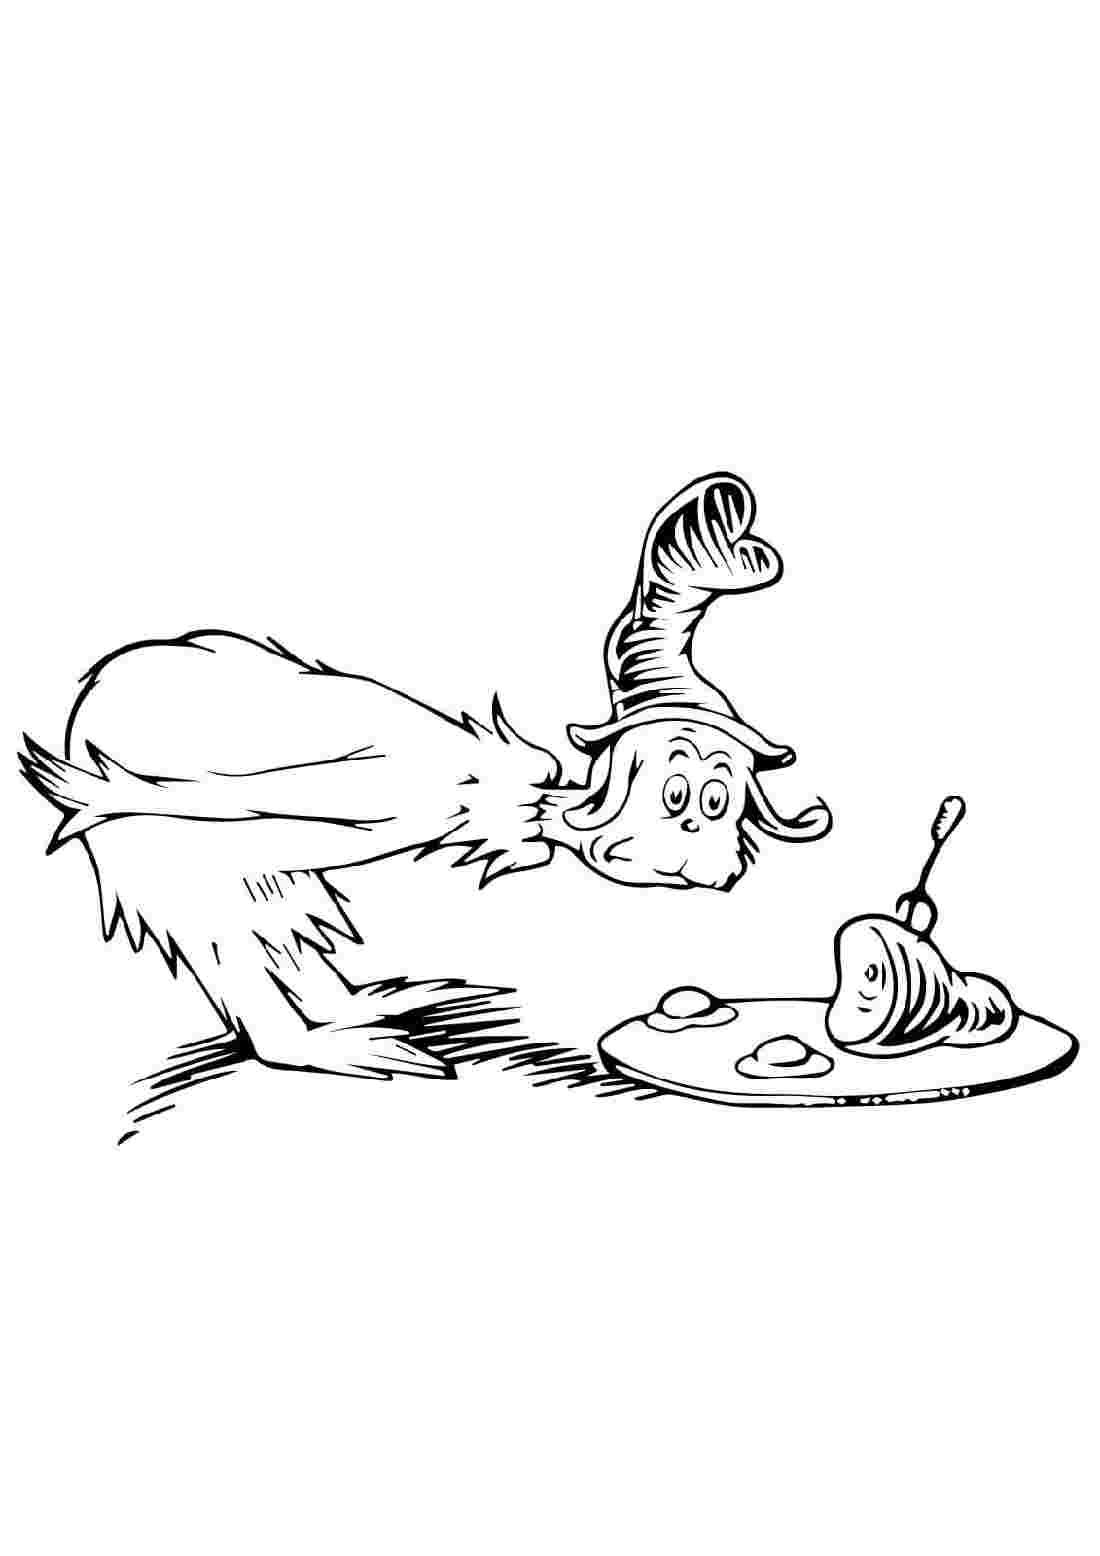 Green eggs and ham coloring pages dr seuss coloring pages green eggs and ham coloring pages inspirational